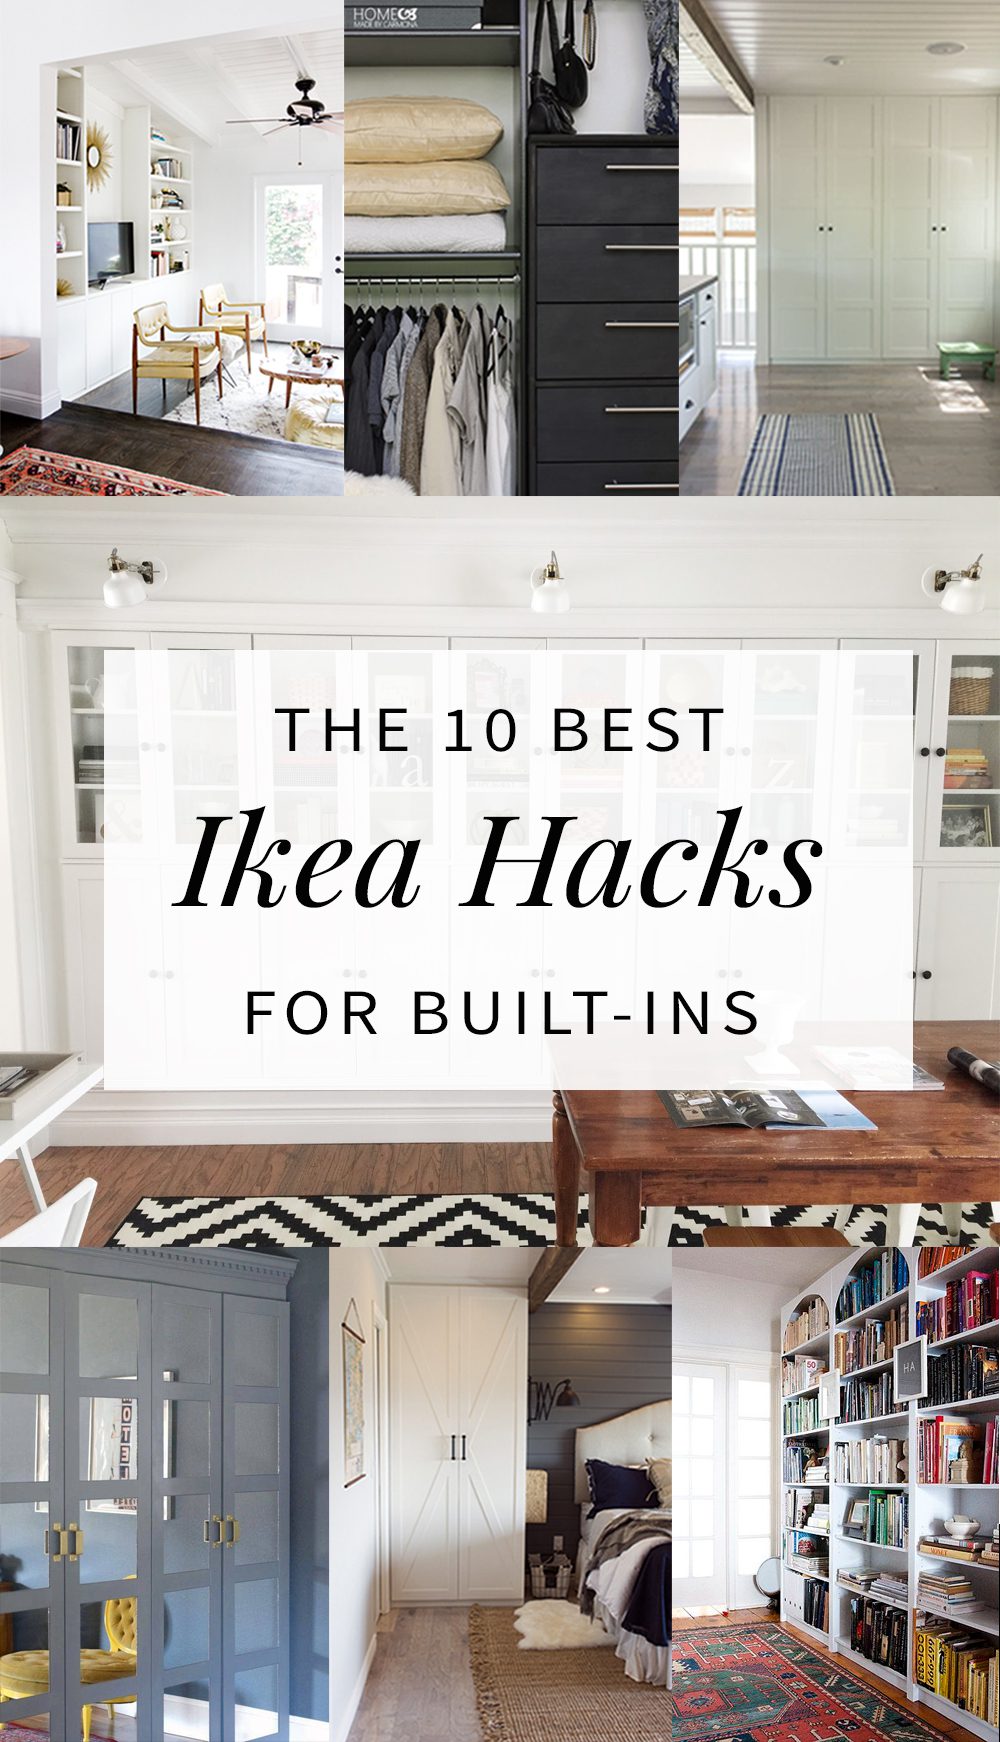 Good hair days start with these 4 little hacks - IKEA Hackers